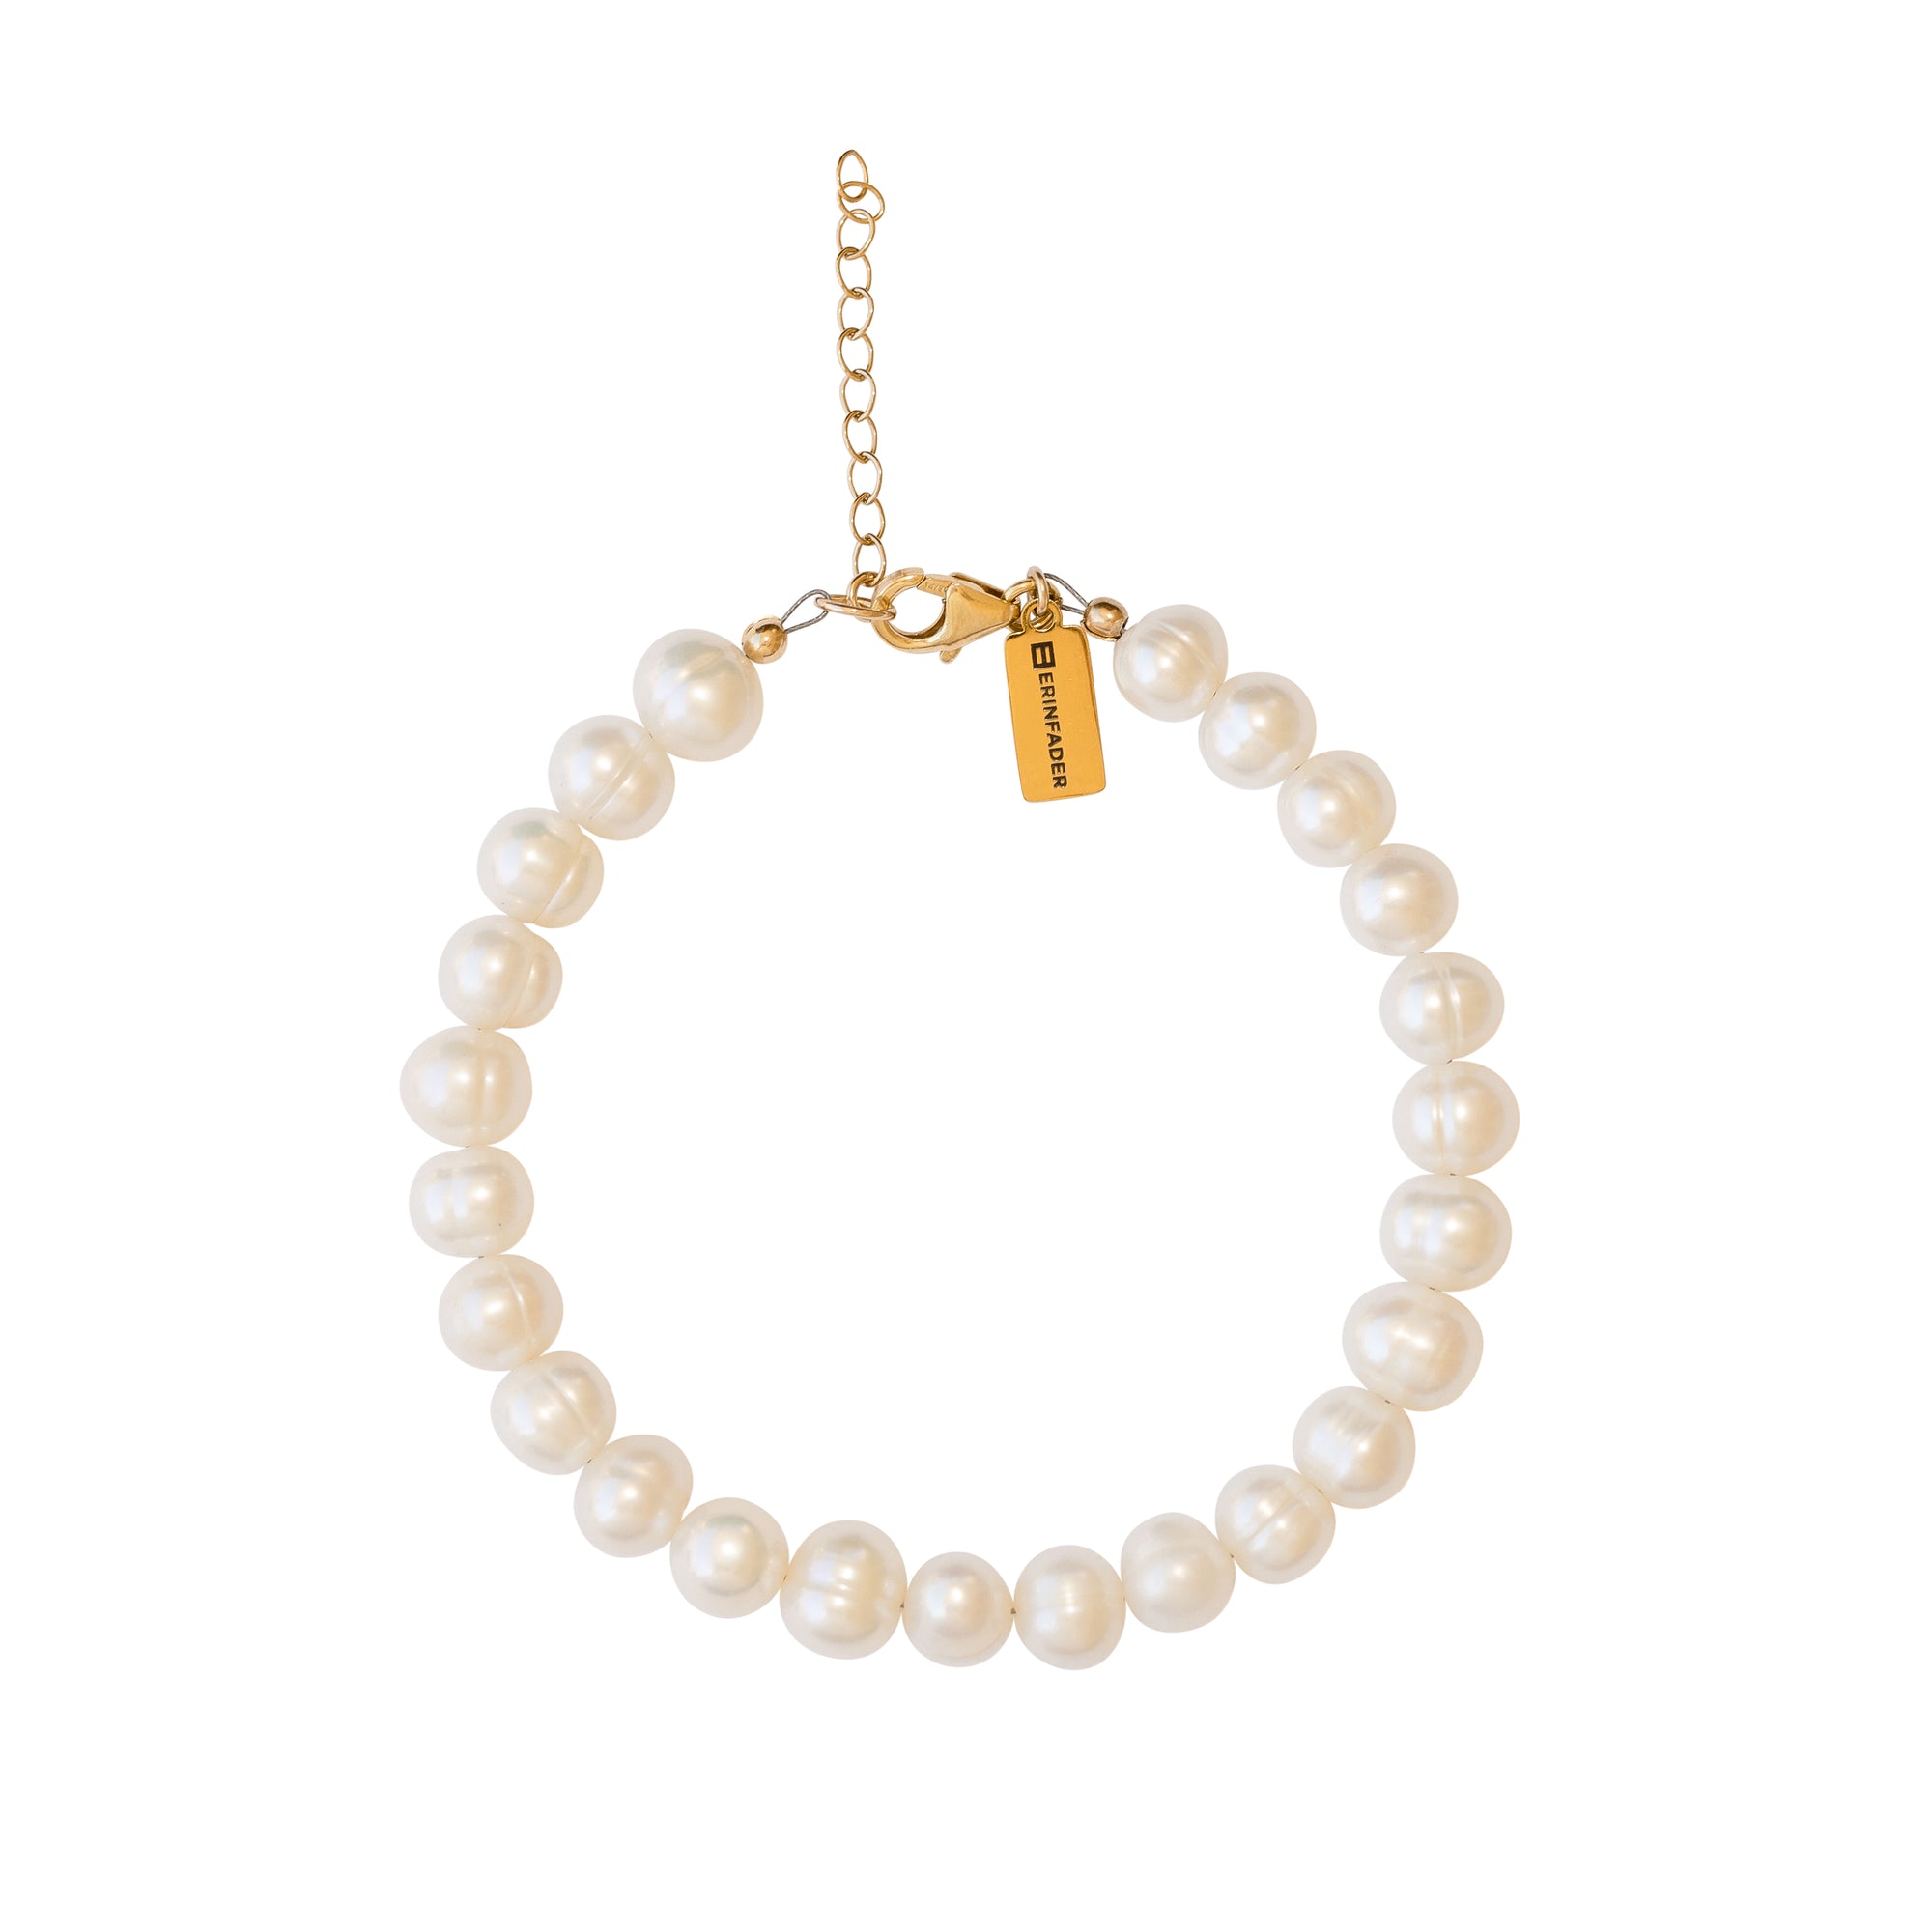 The Monroe Pearl Anklet by Erin Fader Jewelry